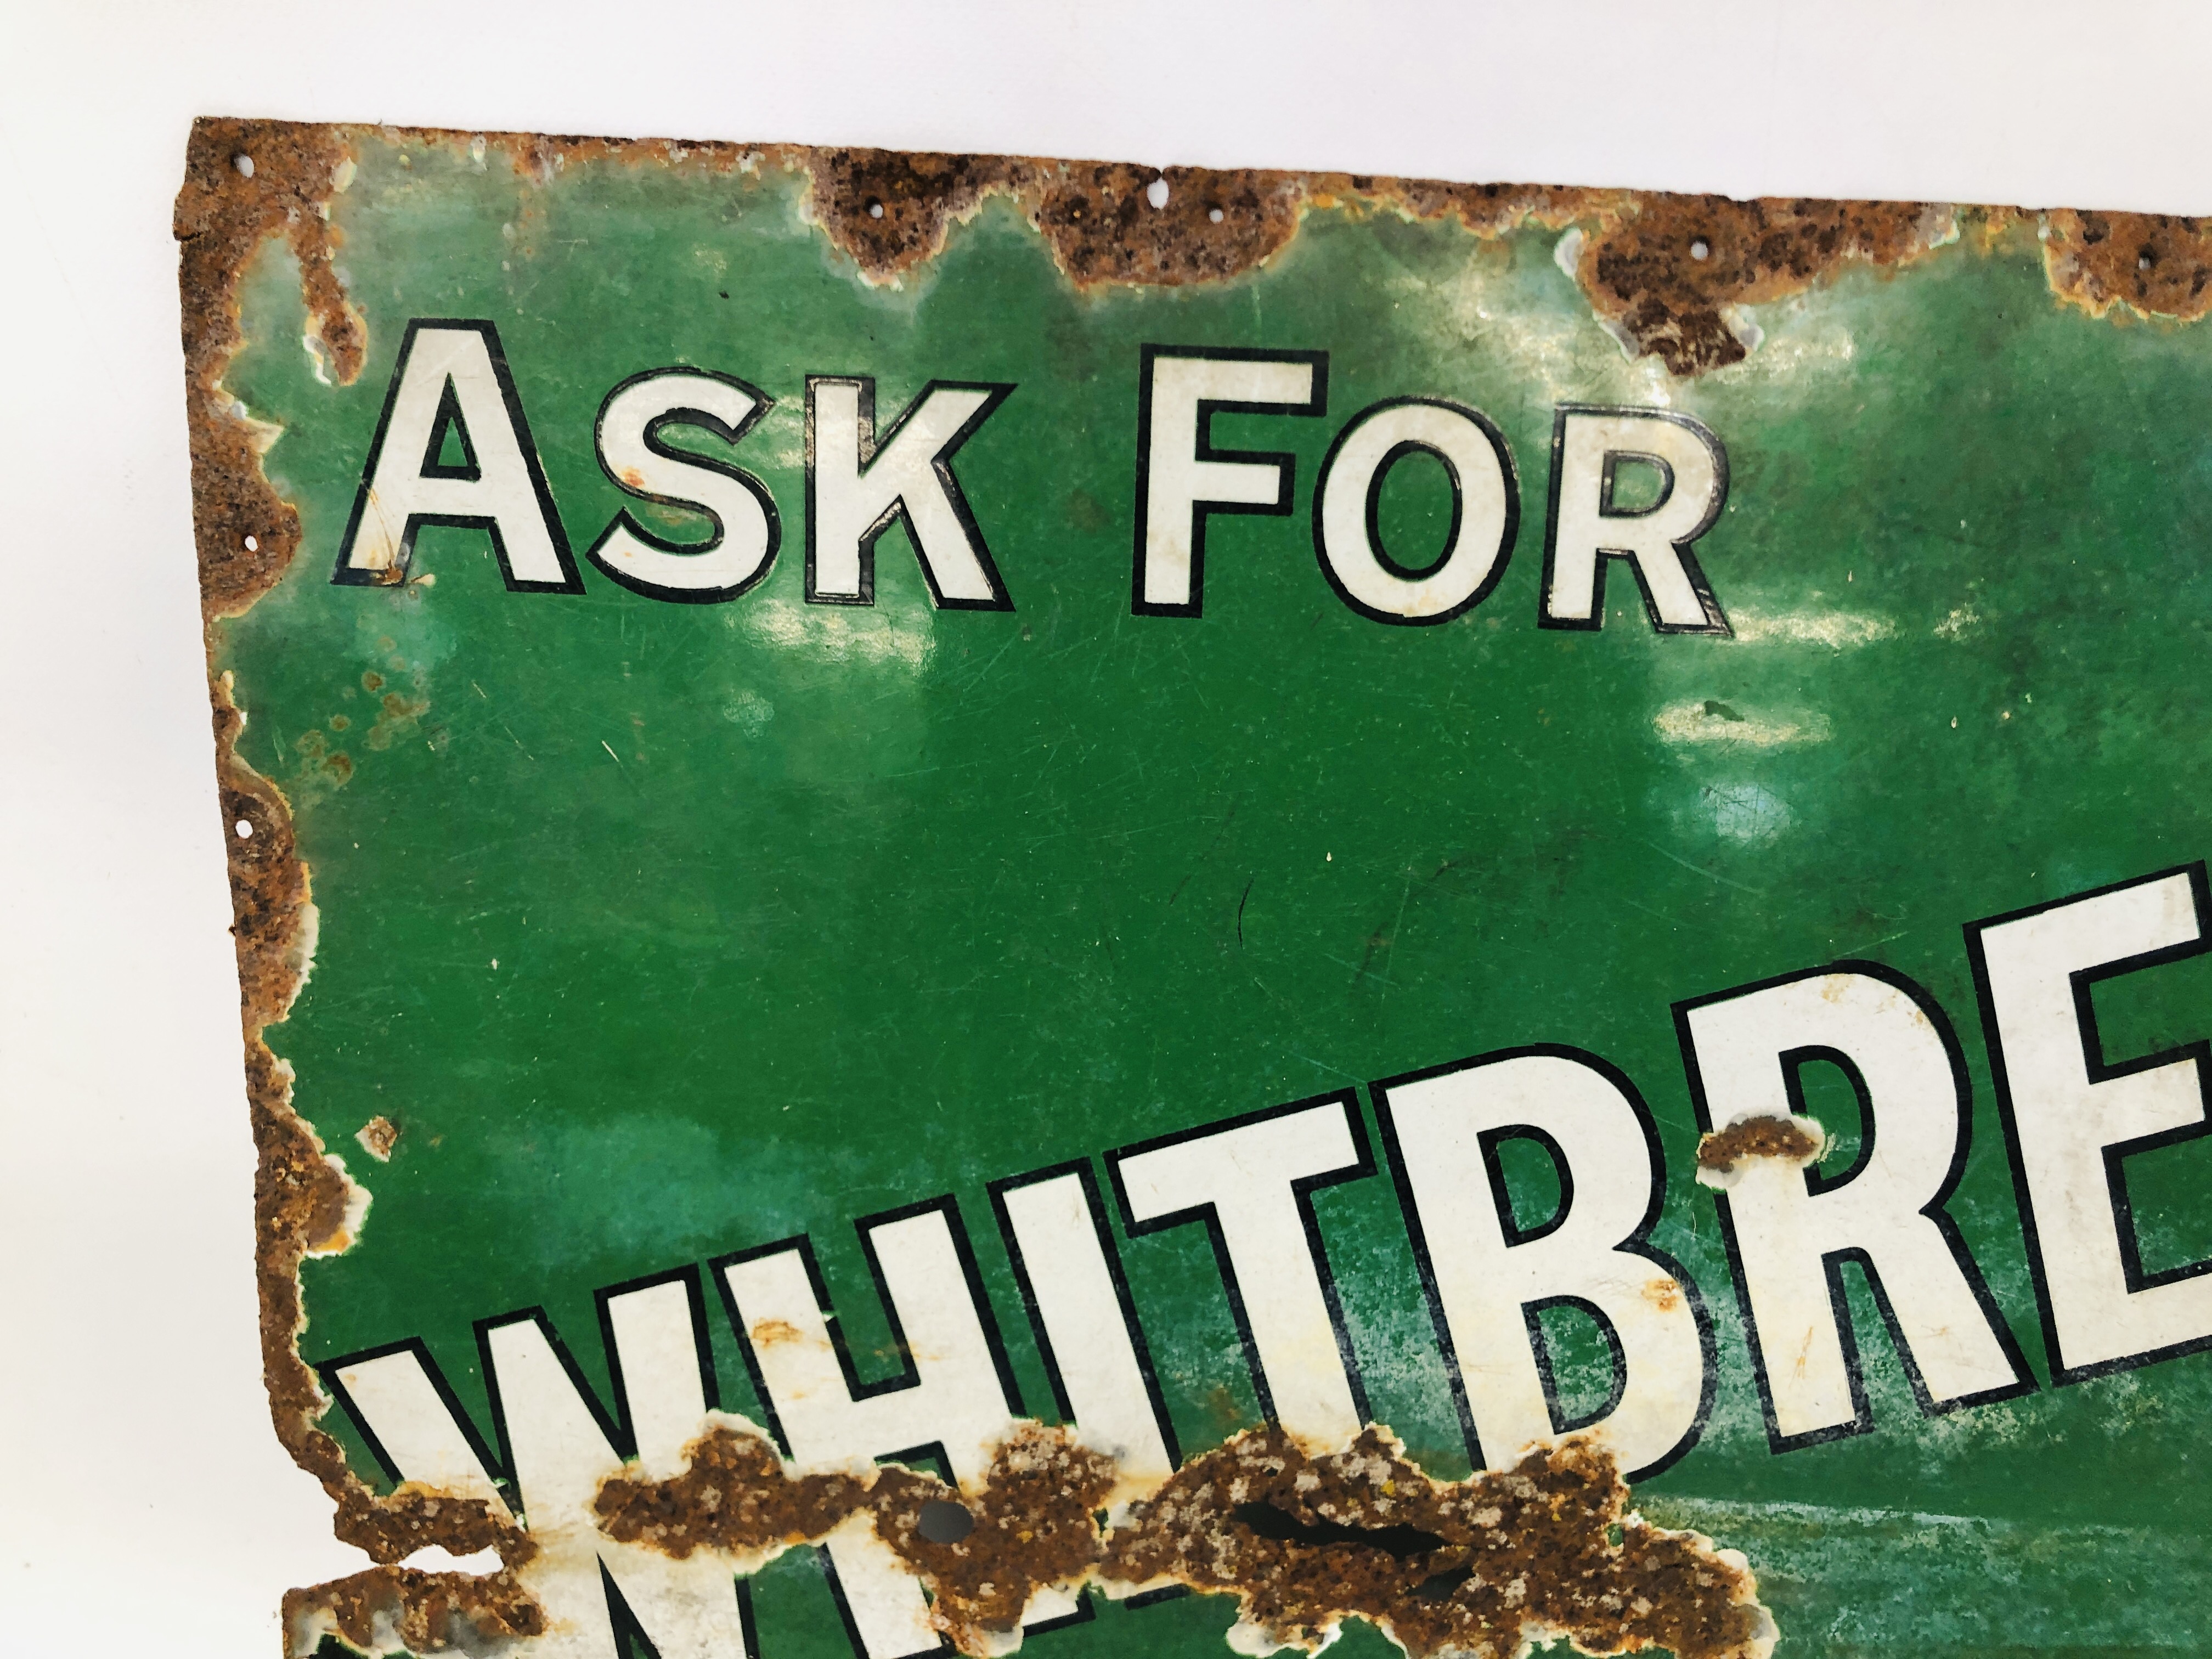 A VINTAGE "ASK FOR WHITBREAD STOUT AND ALE" ENAMEL ADVERTISING SIGN - W 69CM. H 53CM. - Image 2 of 6